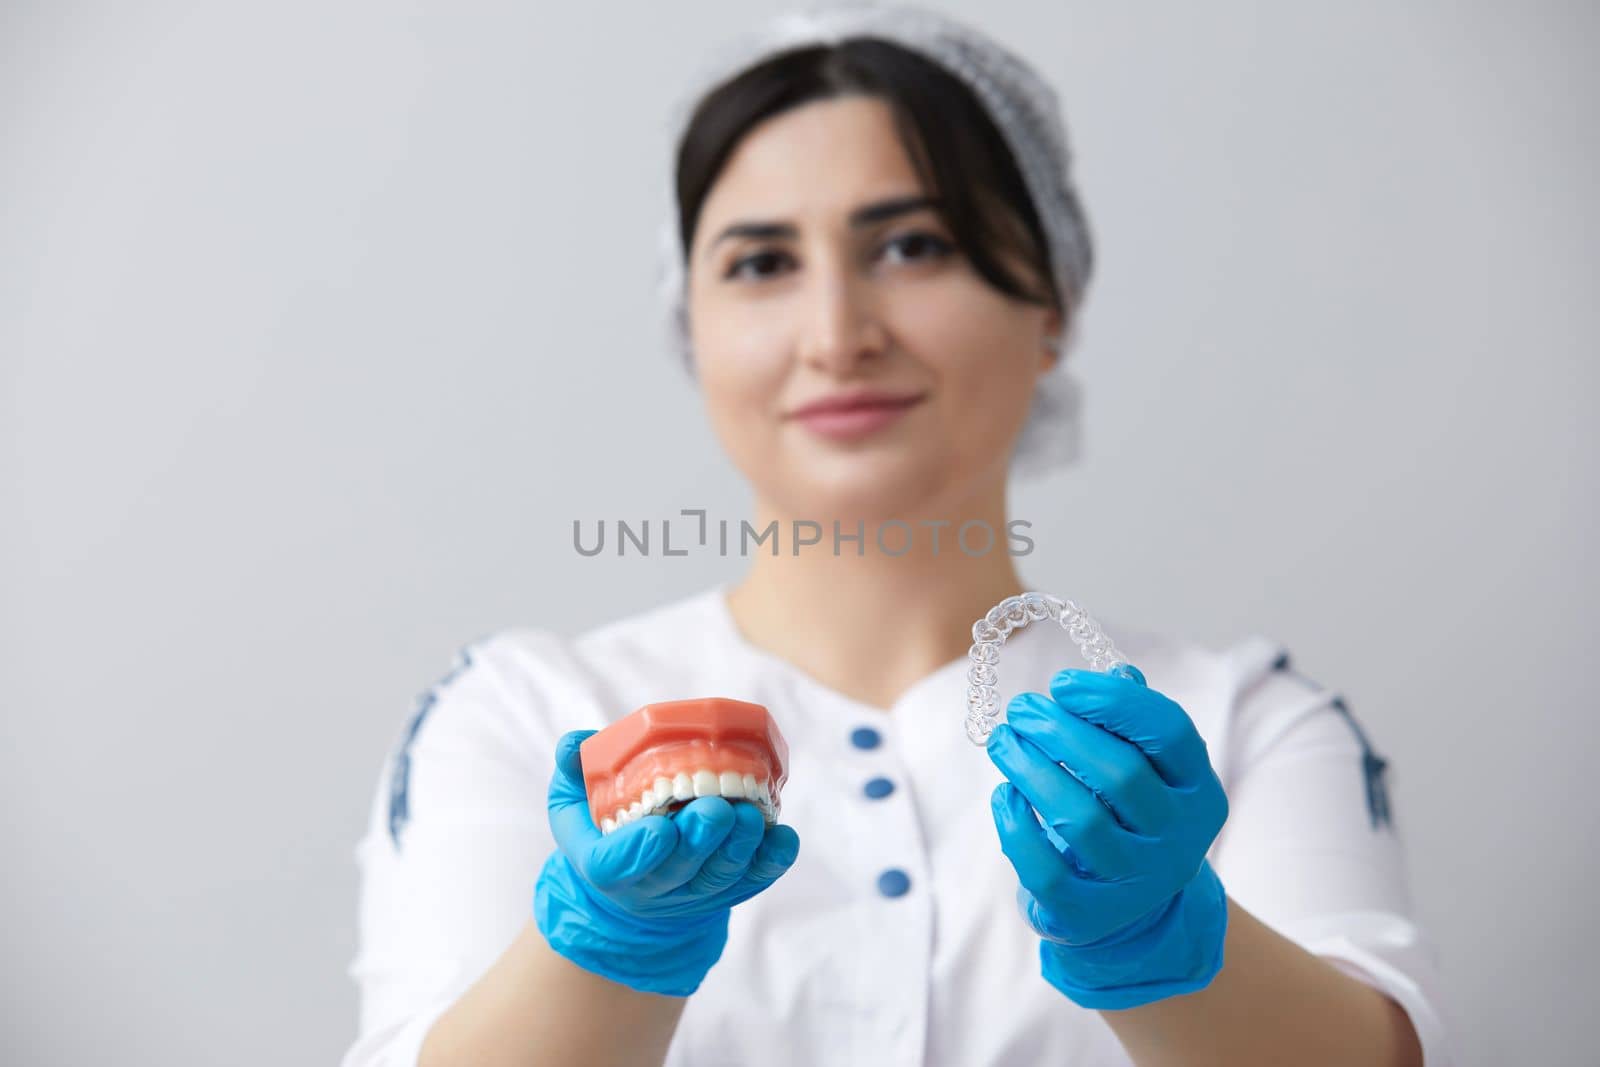 Dentist showing model of human jaw with wire braces and aligners to compare by Mariakray